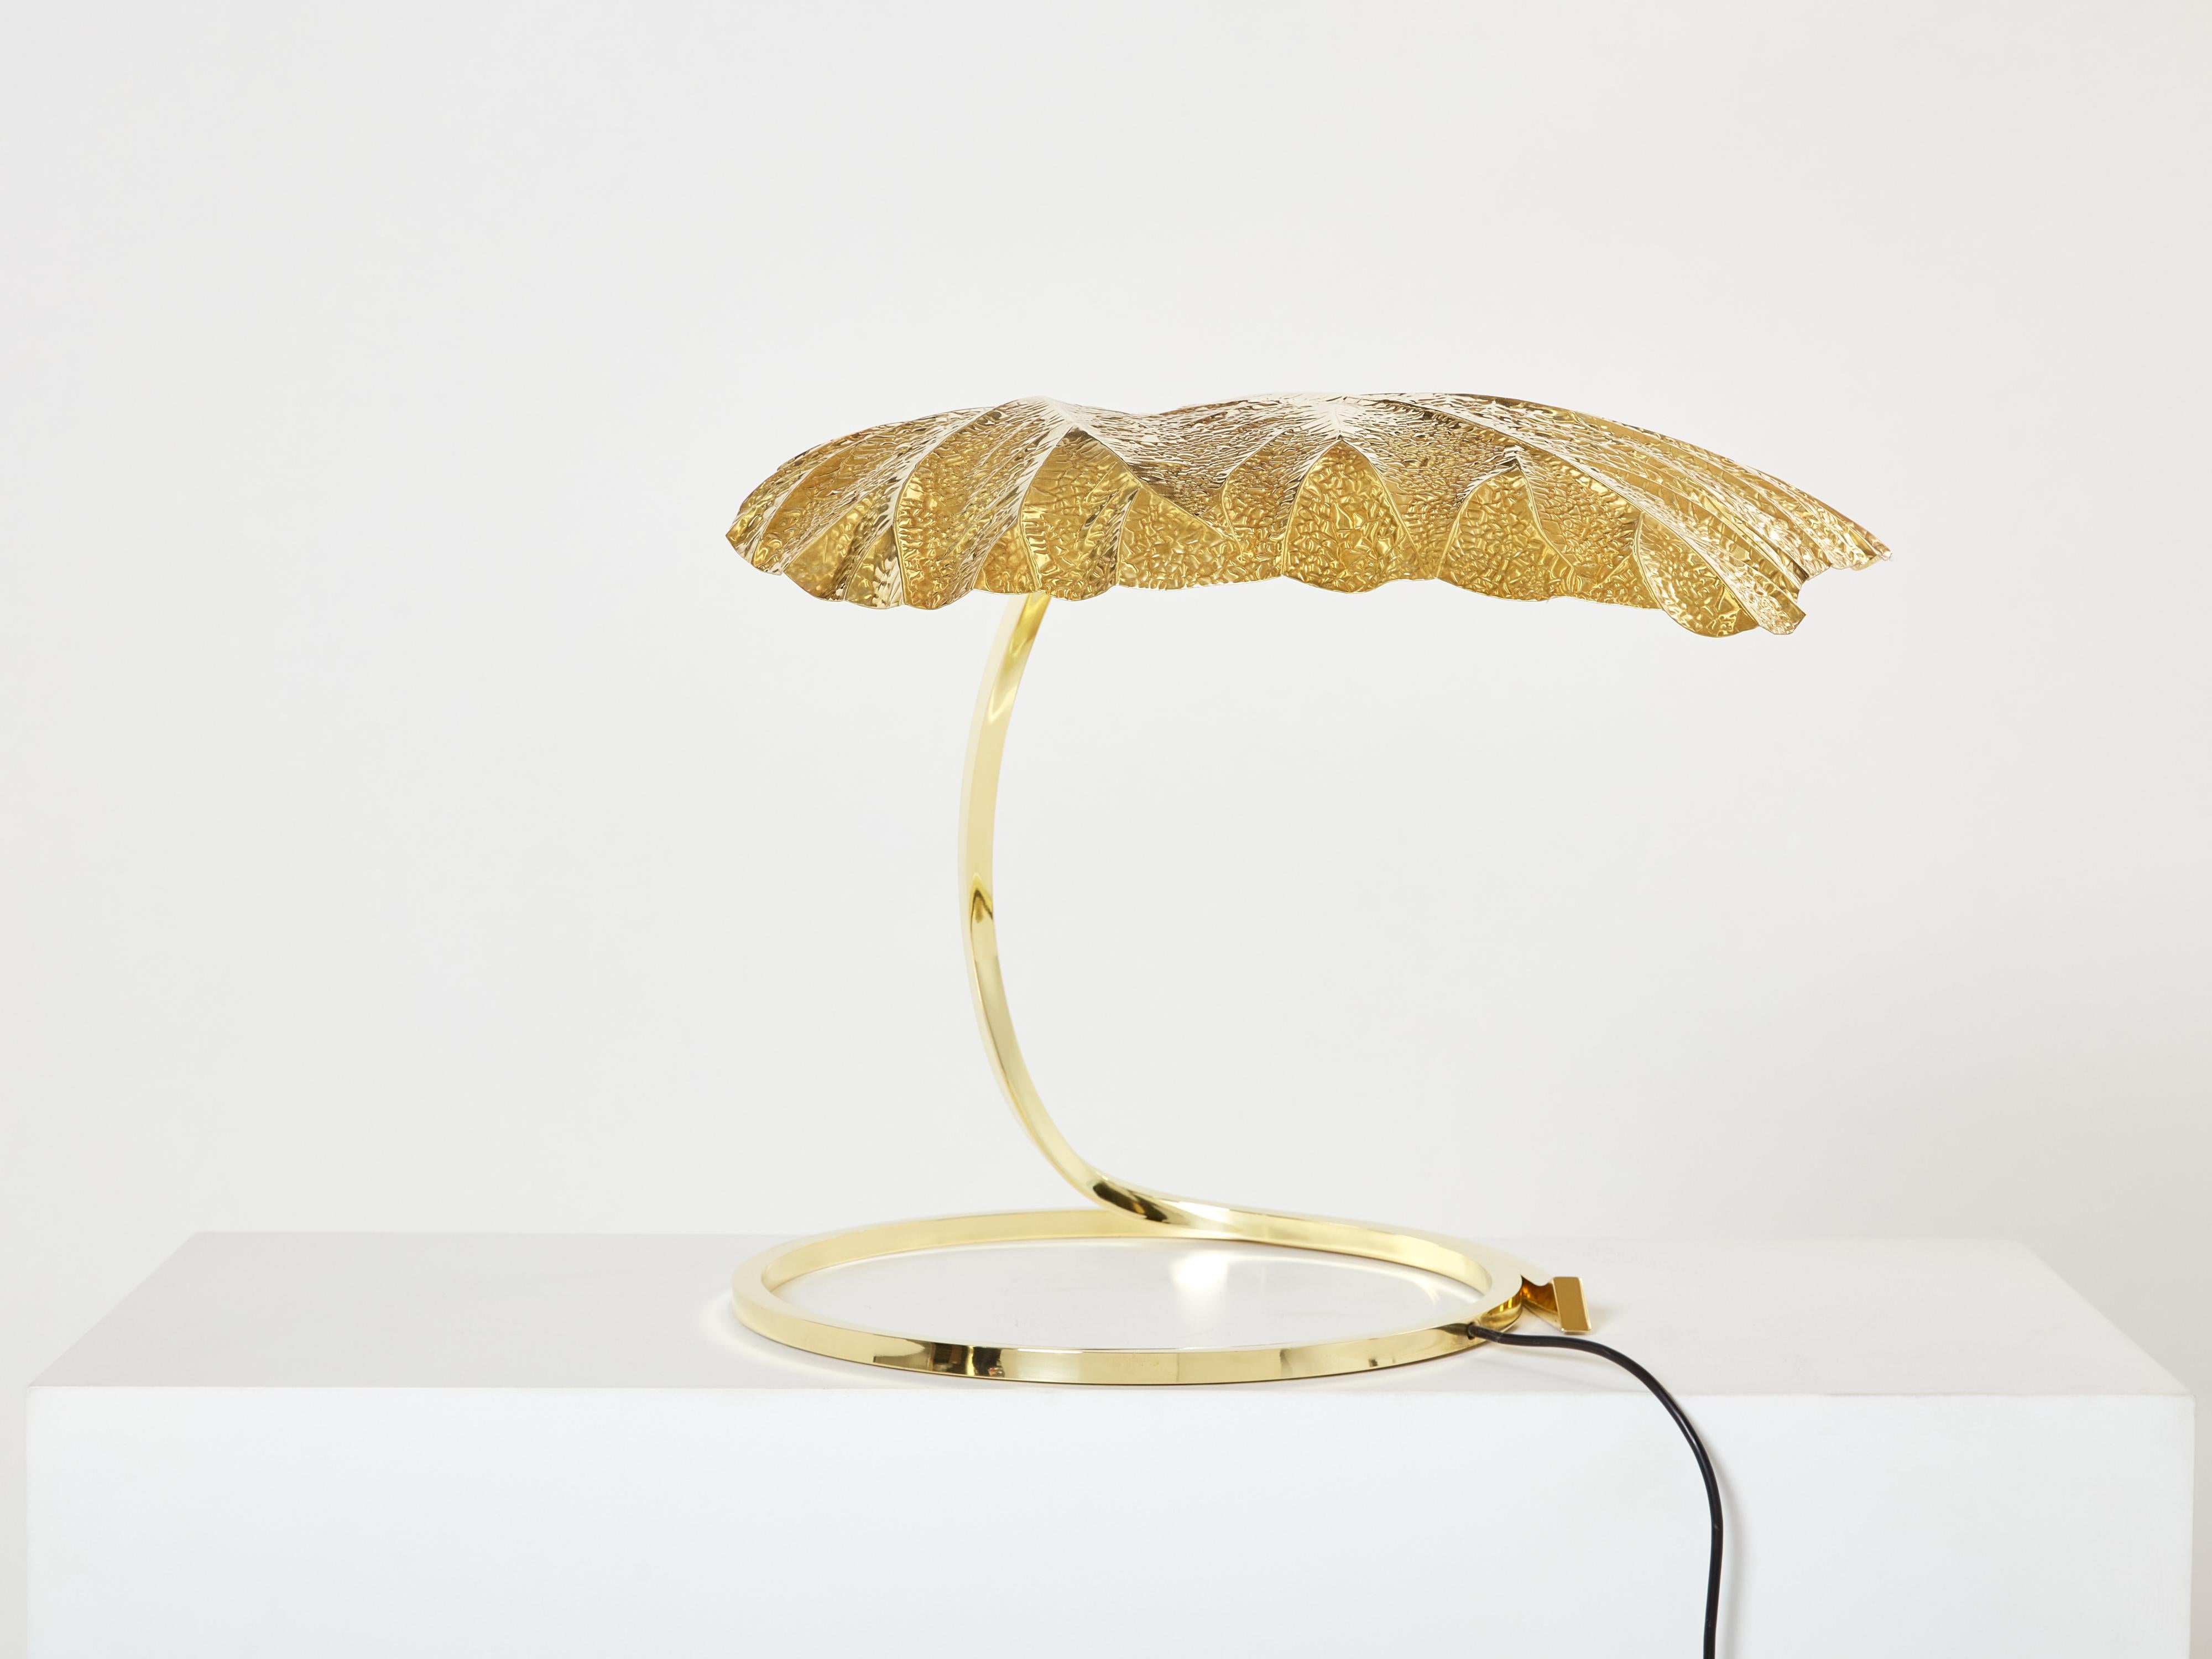 This iconic single leaf Rhubarb table lamp was designed by Tommaso Barbi and Carlo Giorgi was produced by Bottega Gadda in Italy in the 1970s. The circular brass frame sweeps upwards from the base to support the large, decorative, hammered brass